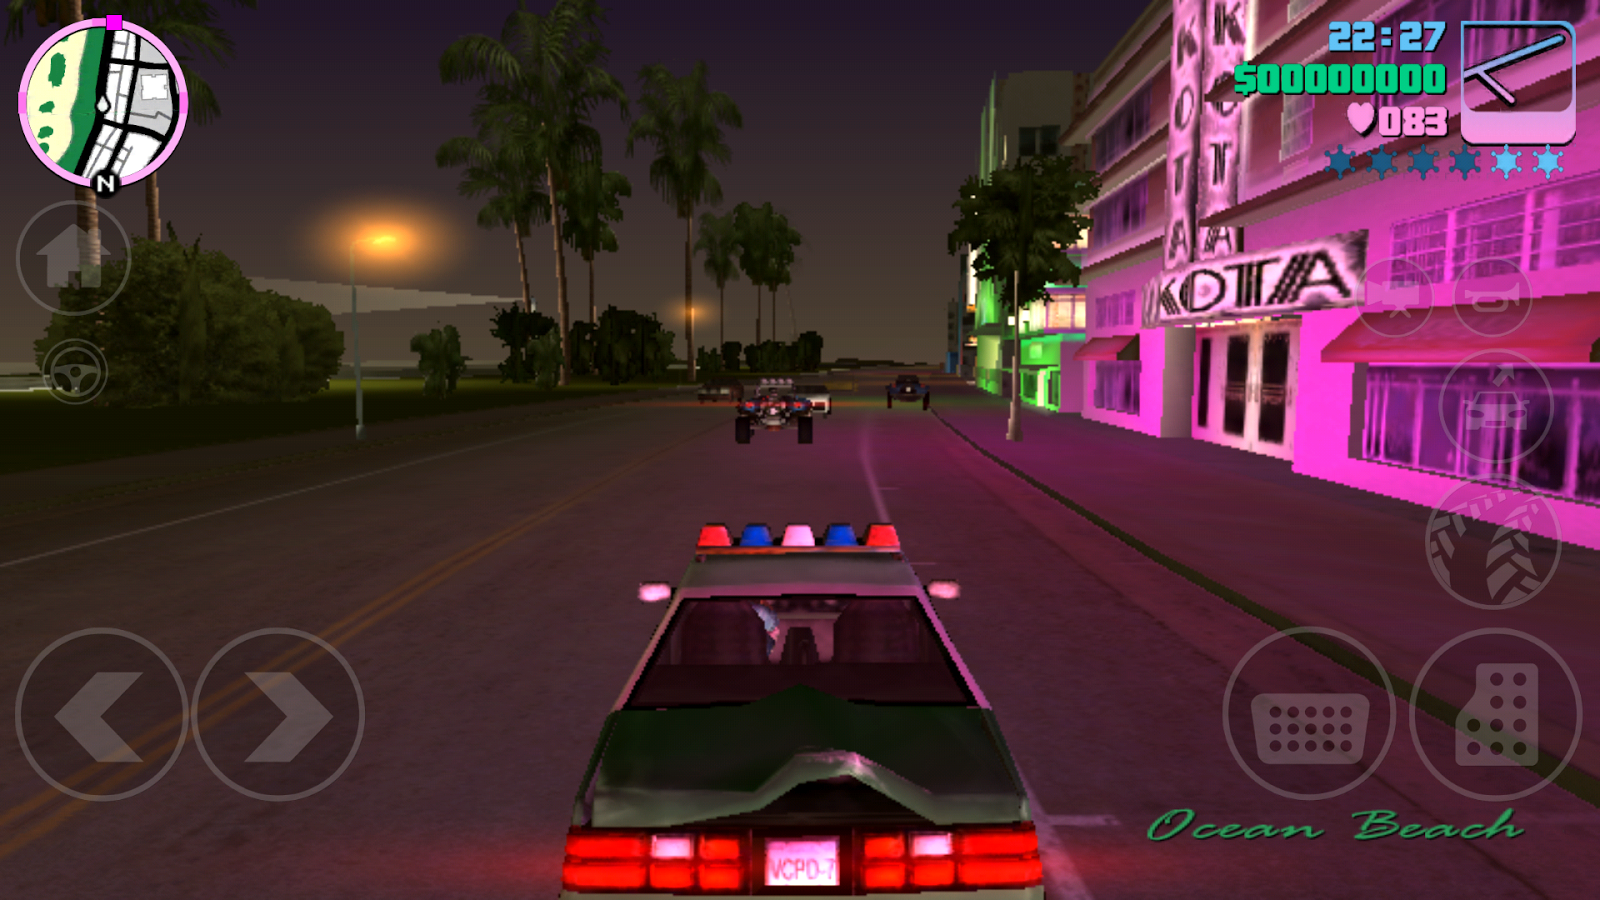 Gta Vice City Apk Data Free Download For Android  librarypowerful